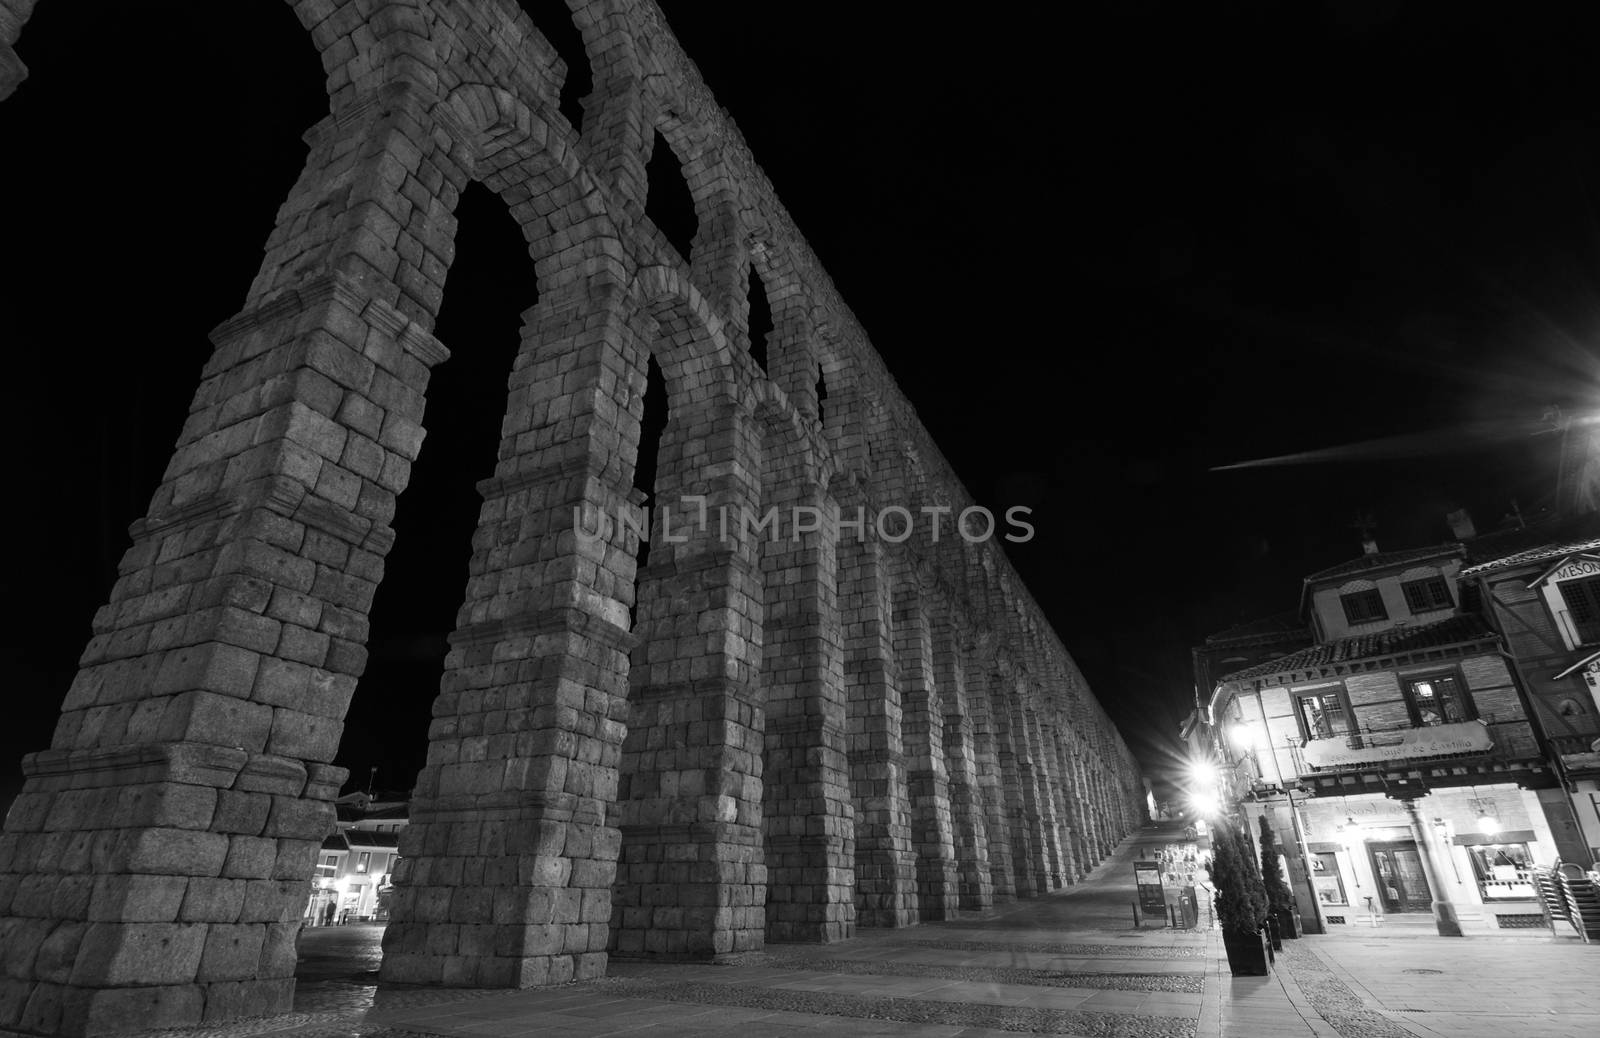 The ancient Roman aqueduct in black and white.